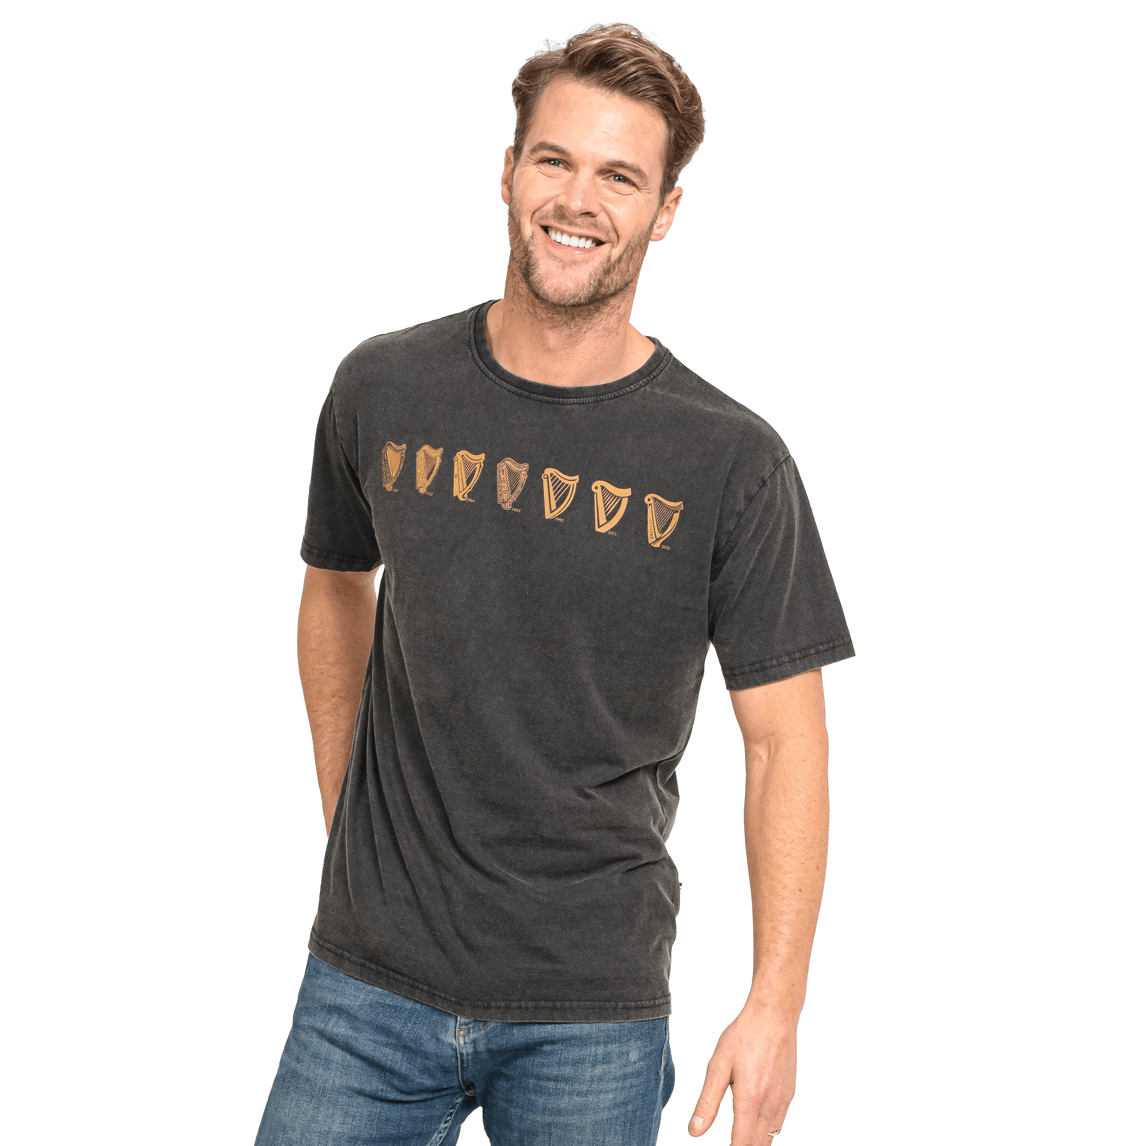 A man is smiling while wearing a black Guinness Evolution Harp Tee.